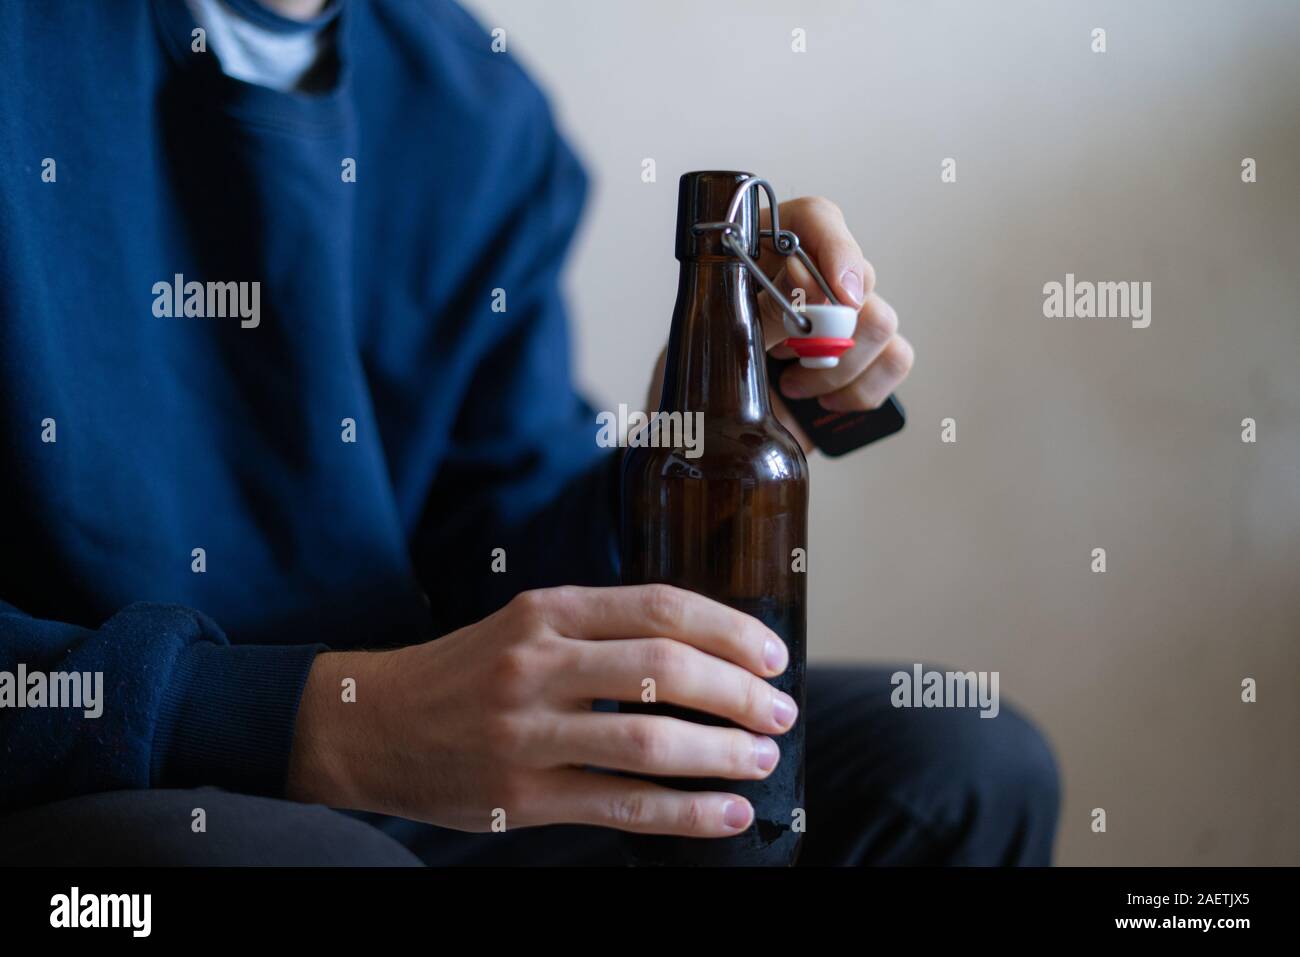 man holding the glass bottle of alcohol sitting at home in depression, bad habit problem Stock Photo